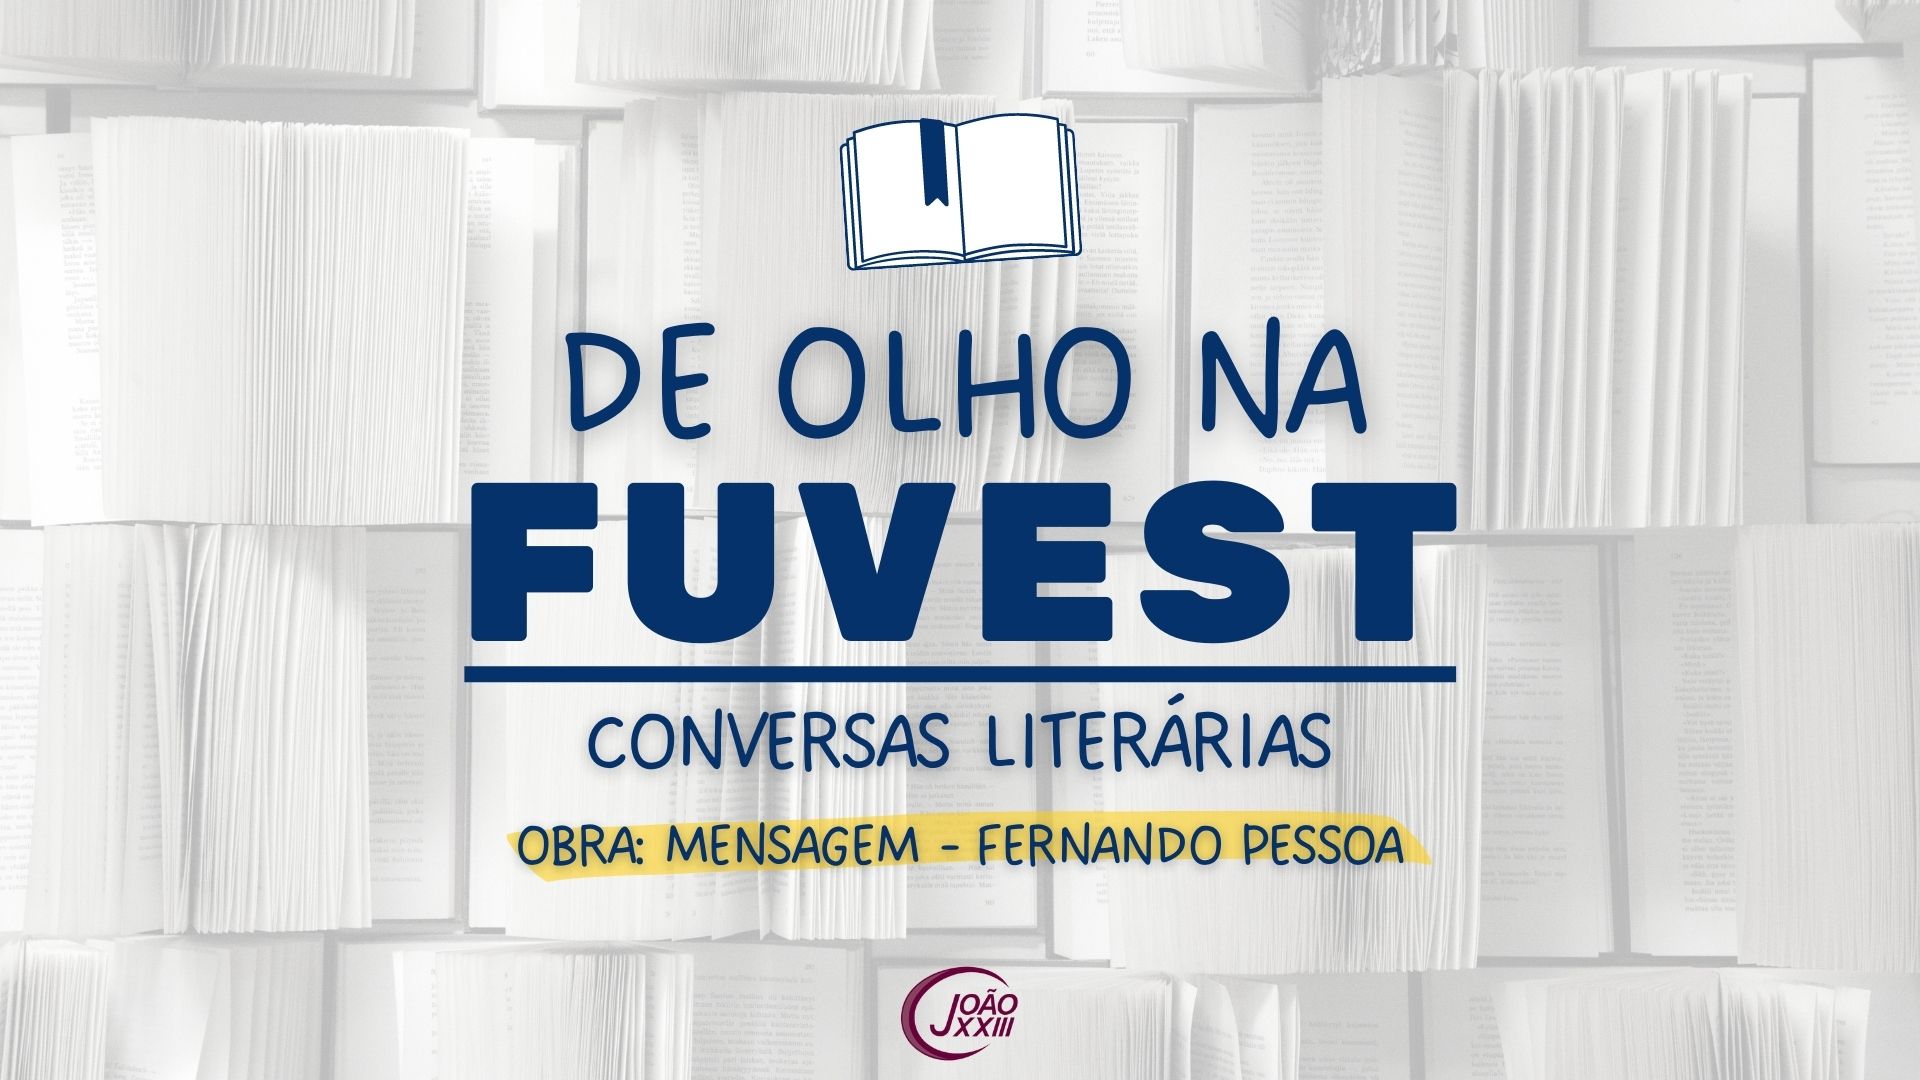 You are currently viewing De olho na Fuvest